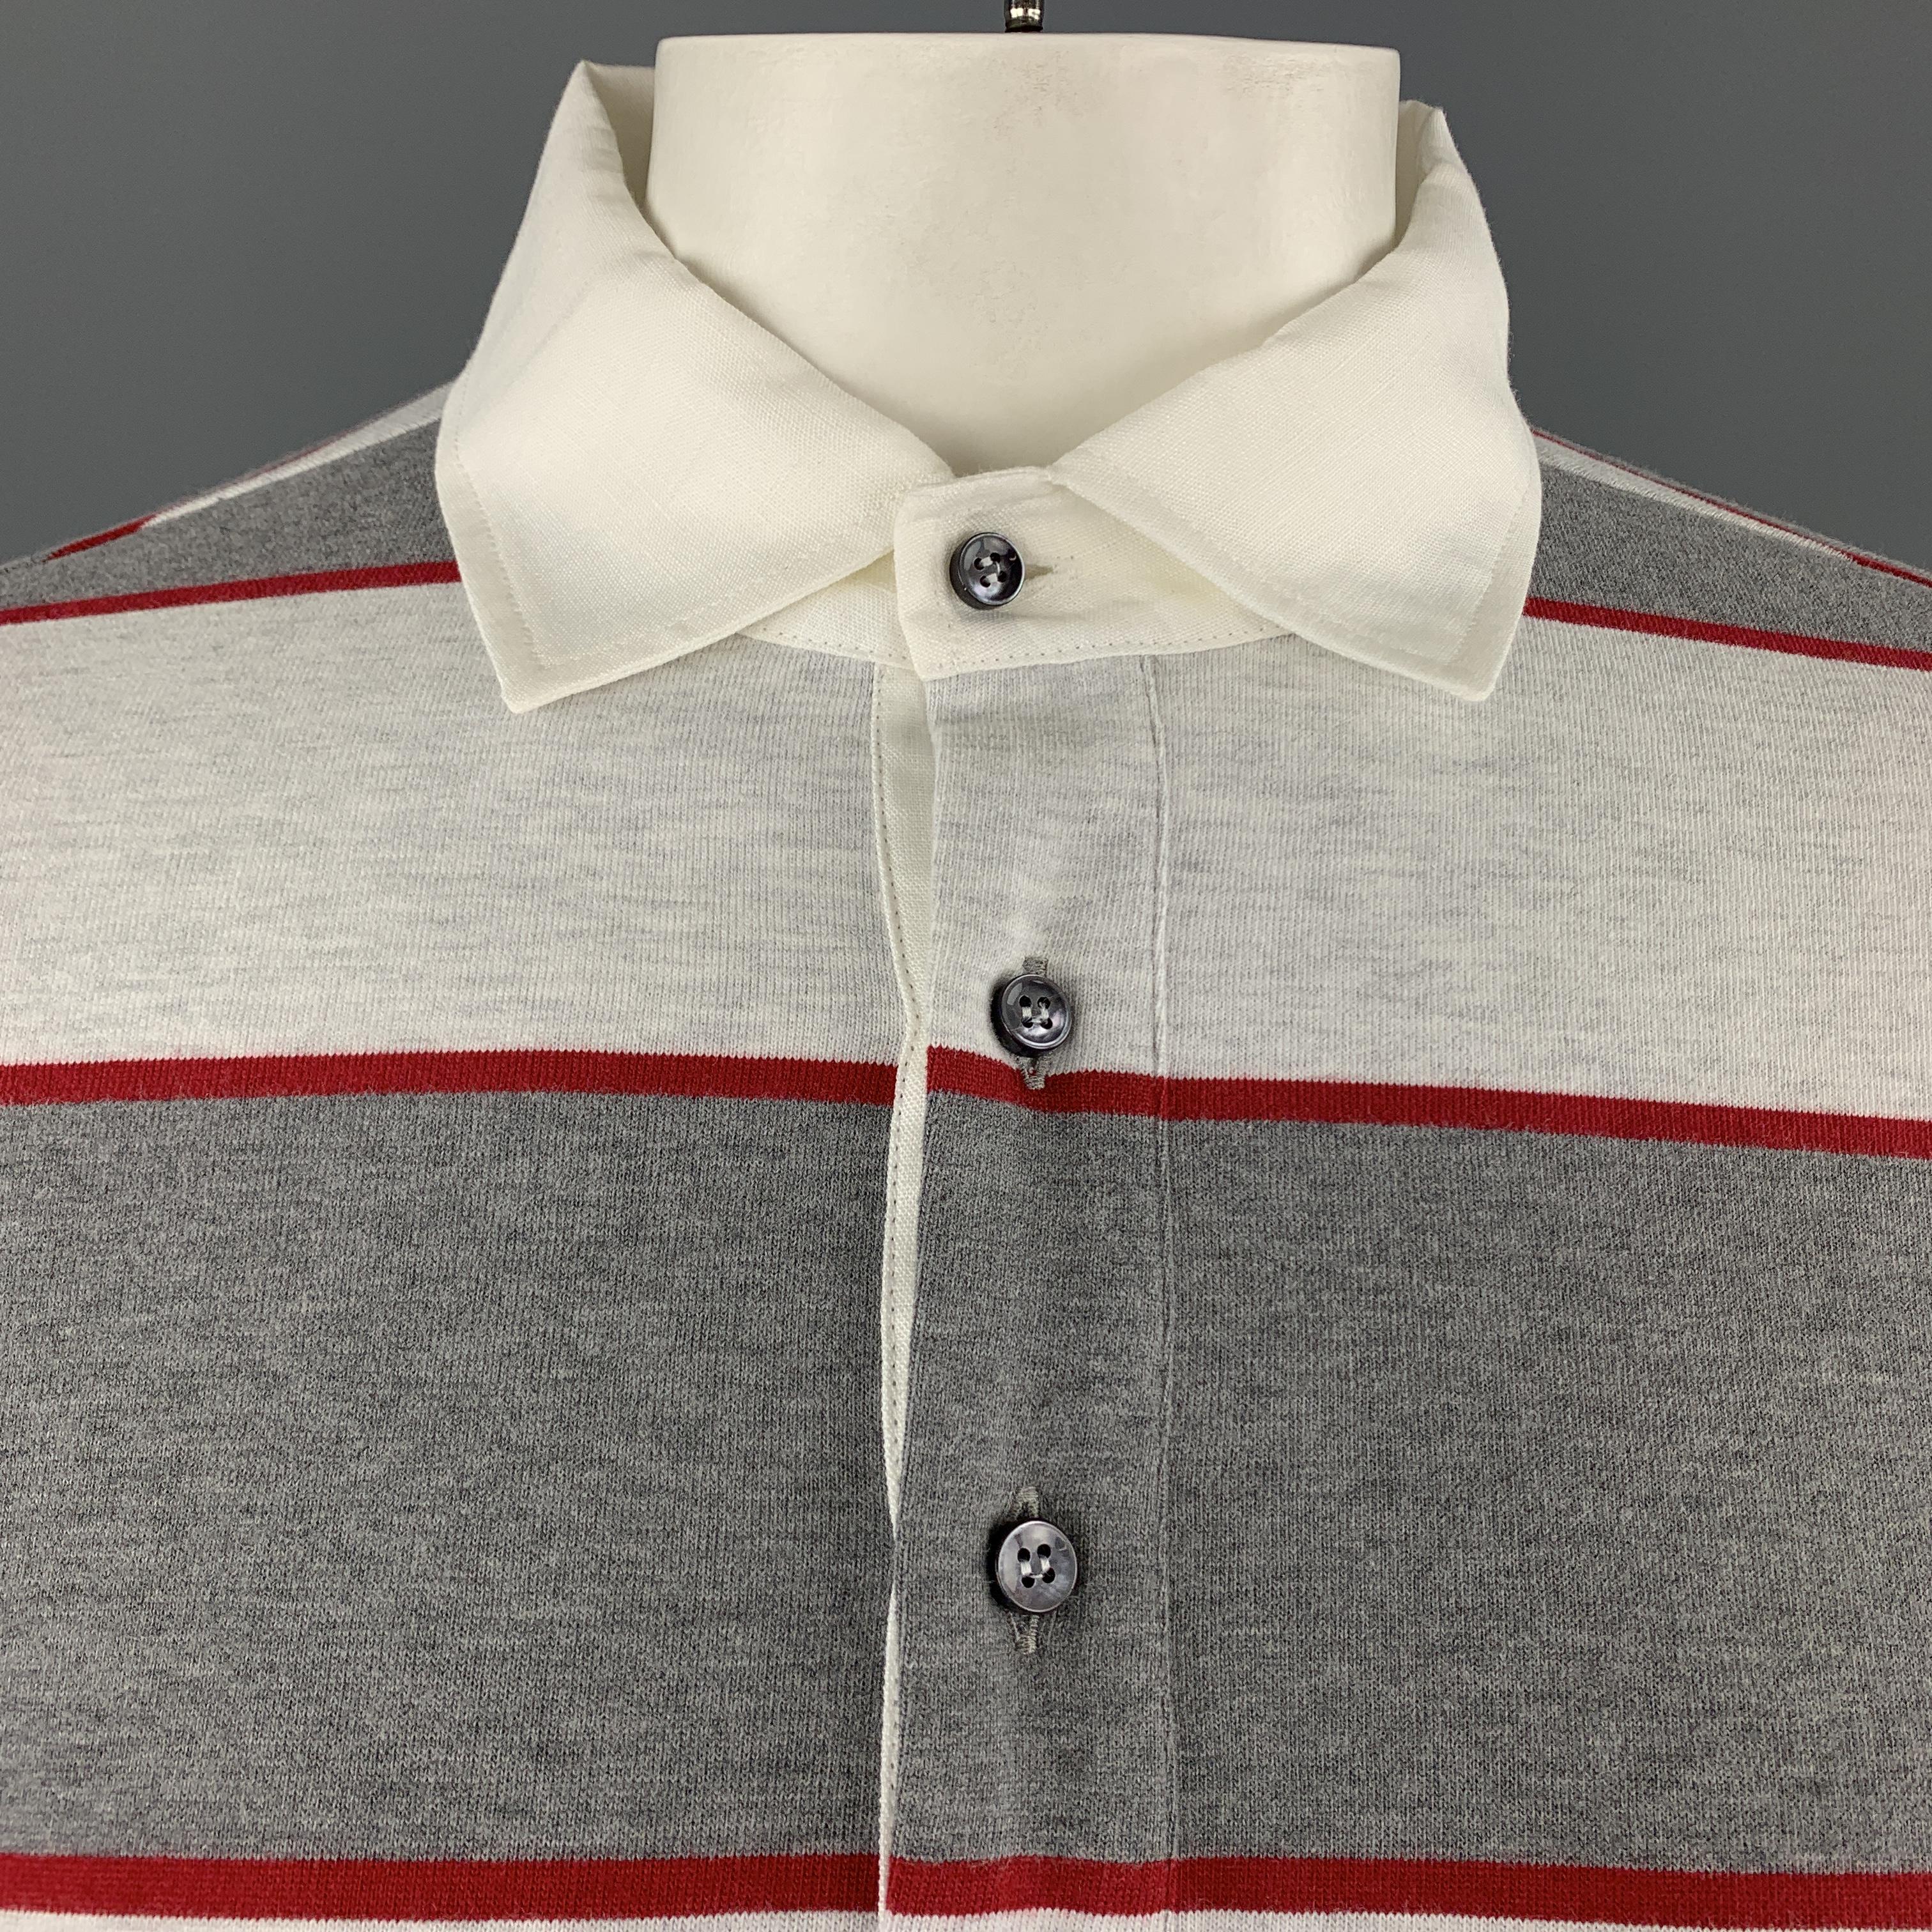 BRUNELLO CUCINELLI ruby polo comes in gray and red striped jersey with a white half button up collar. Made in Italy.

New with Tags.
Marked: XL

Measurements:

Shoulder: 18 in.
Chest: 46 in.
Sleeve: 27 in.
Length: 29 in.